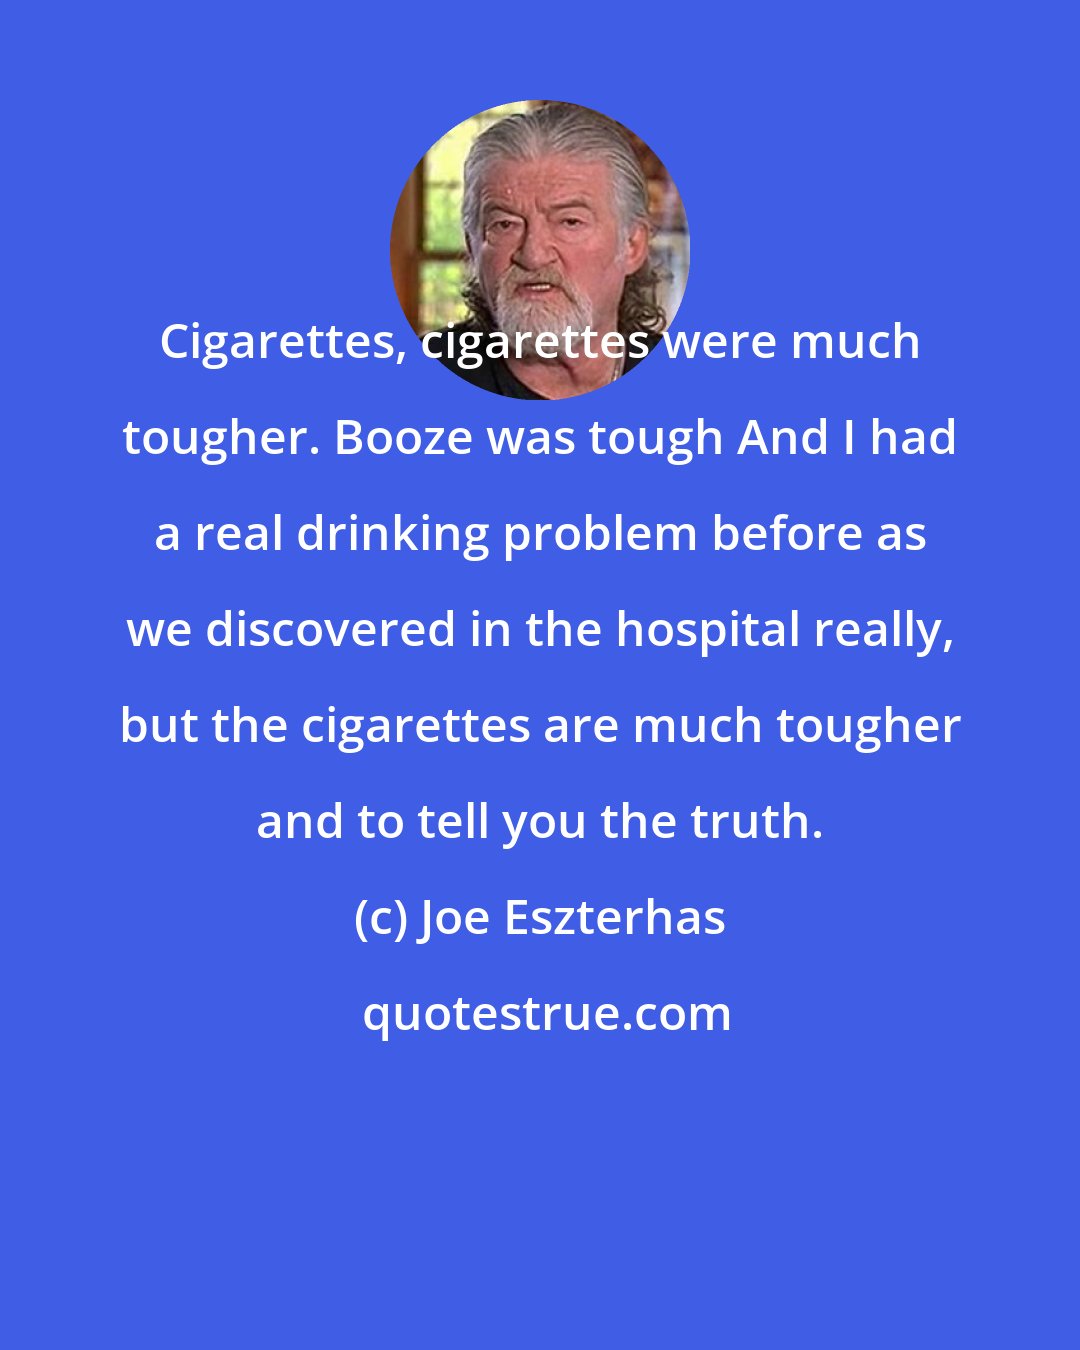 Joe Eszterhas: Cigarettes, cigarettes were much tougher. Booze was tough And I had a real drinking problem before as we discovered in the hospital really, but the cigarettes are much tougher and to tell you the truth.